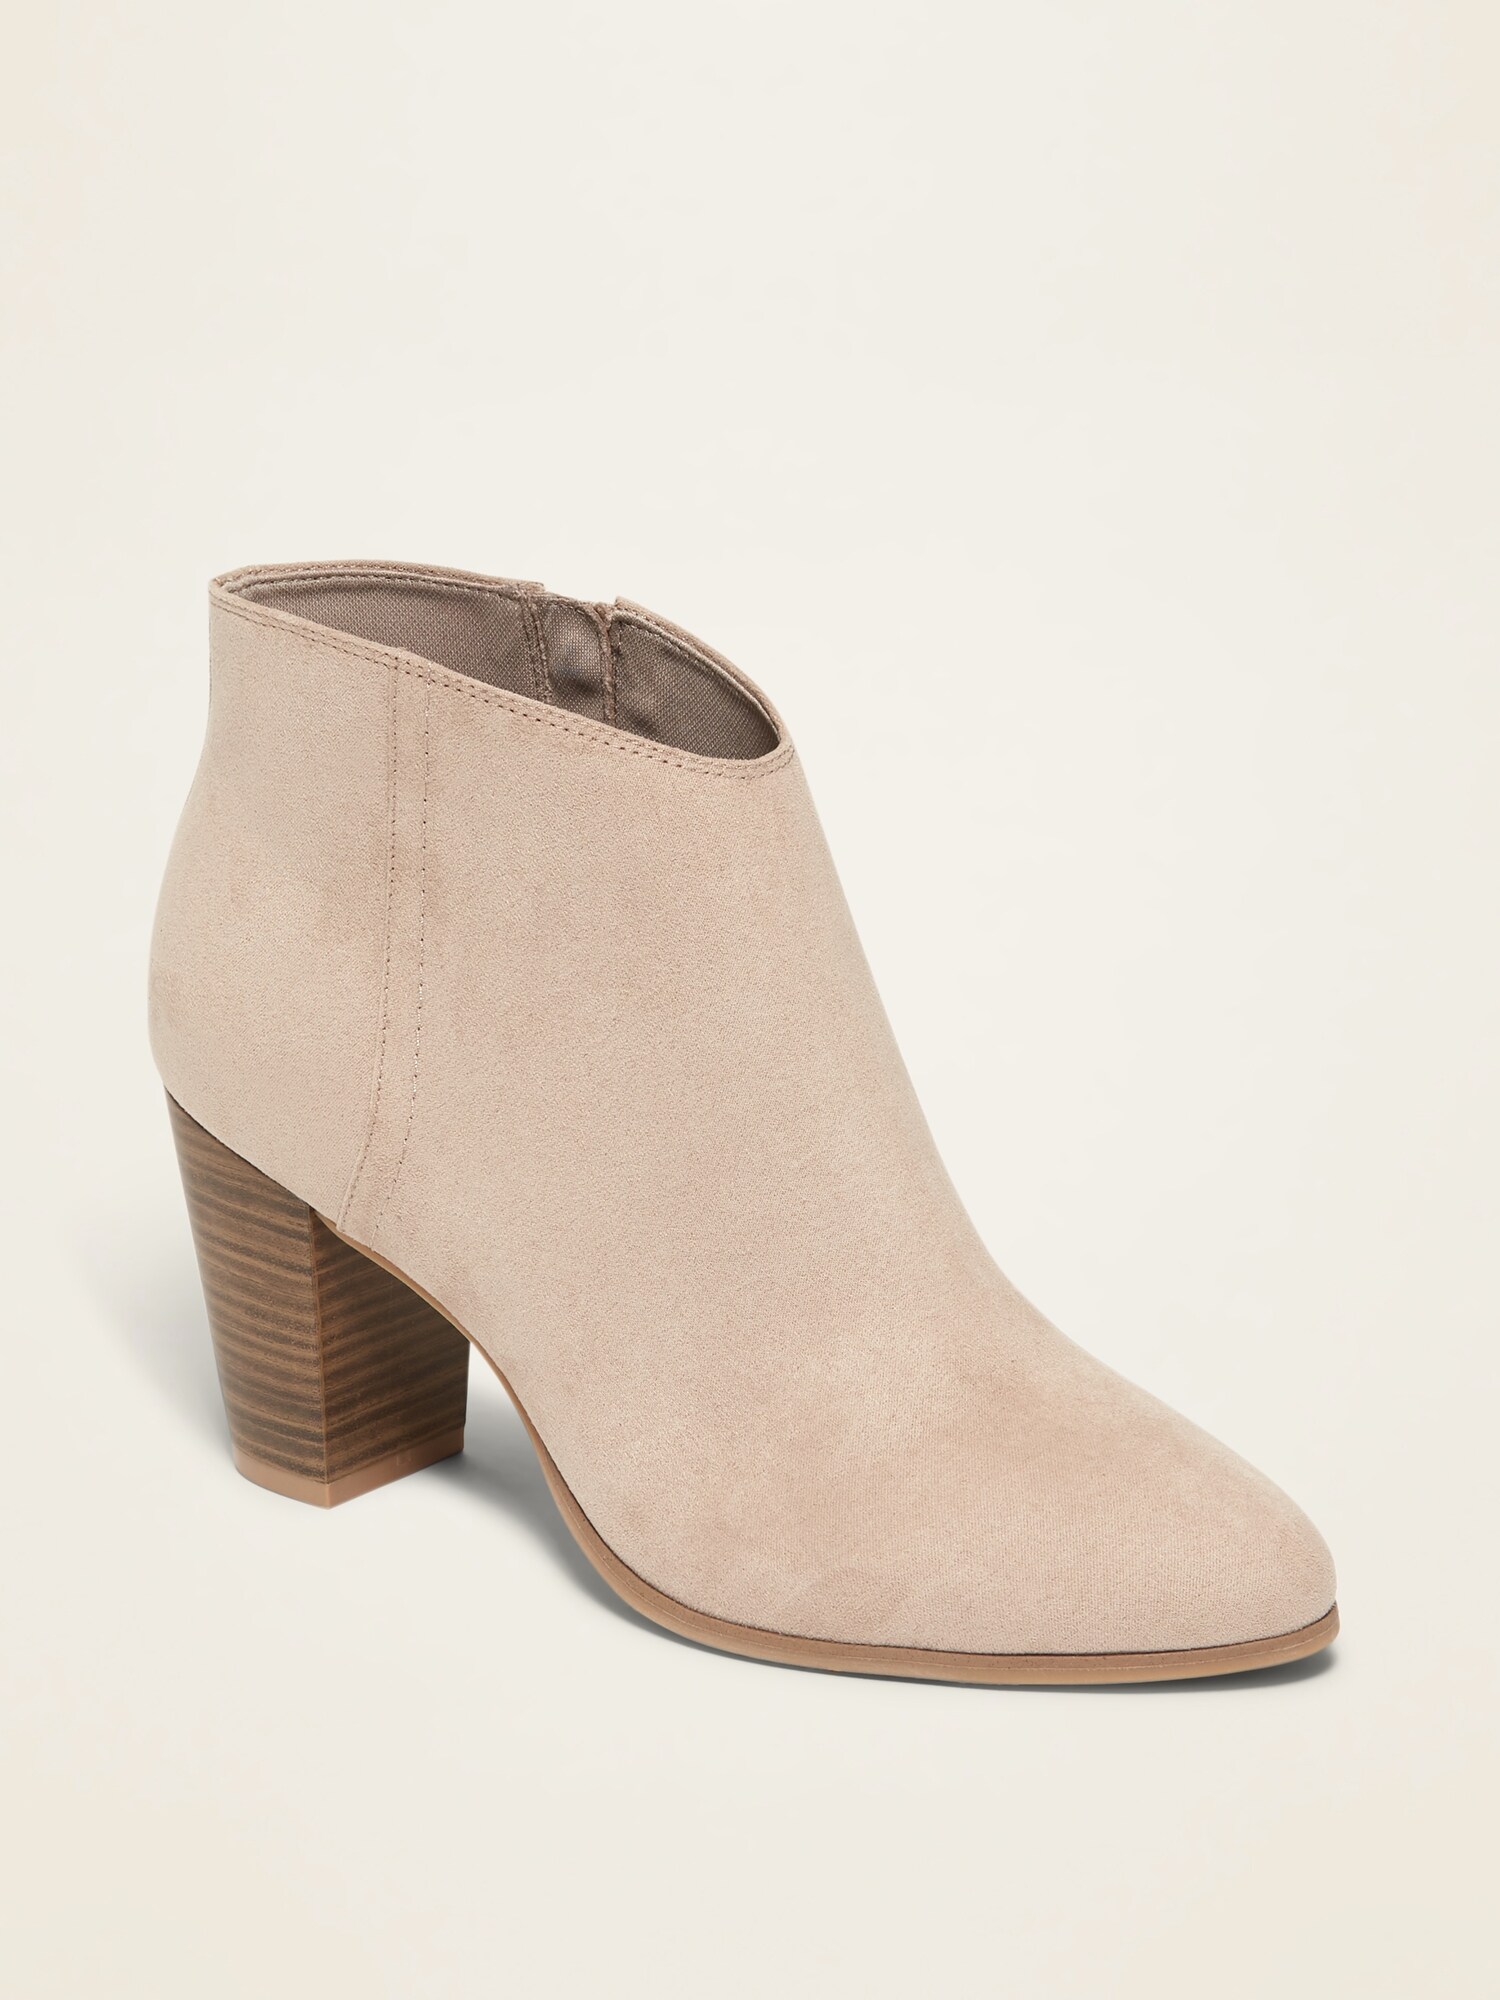 old navy suede boots